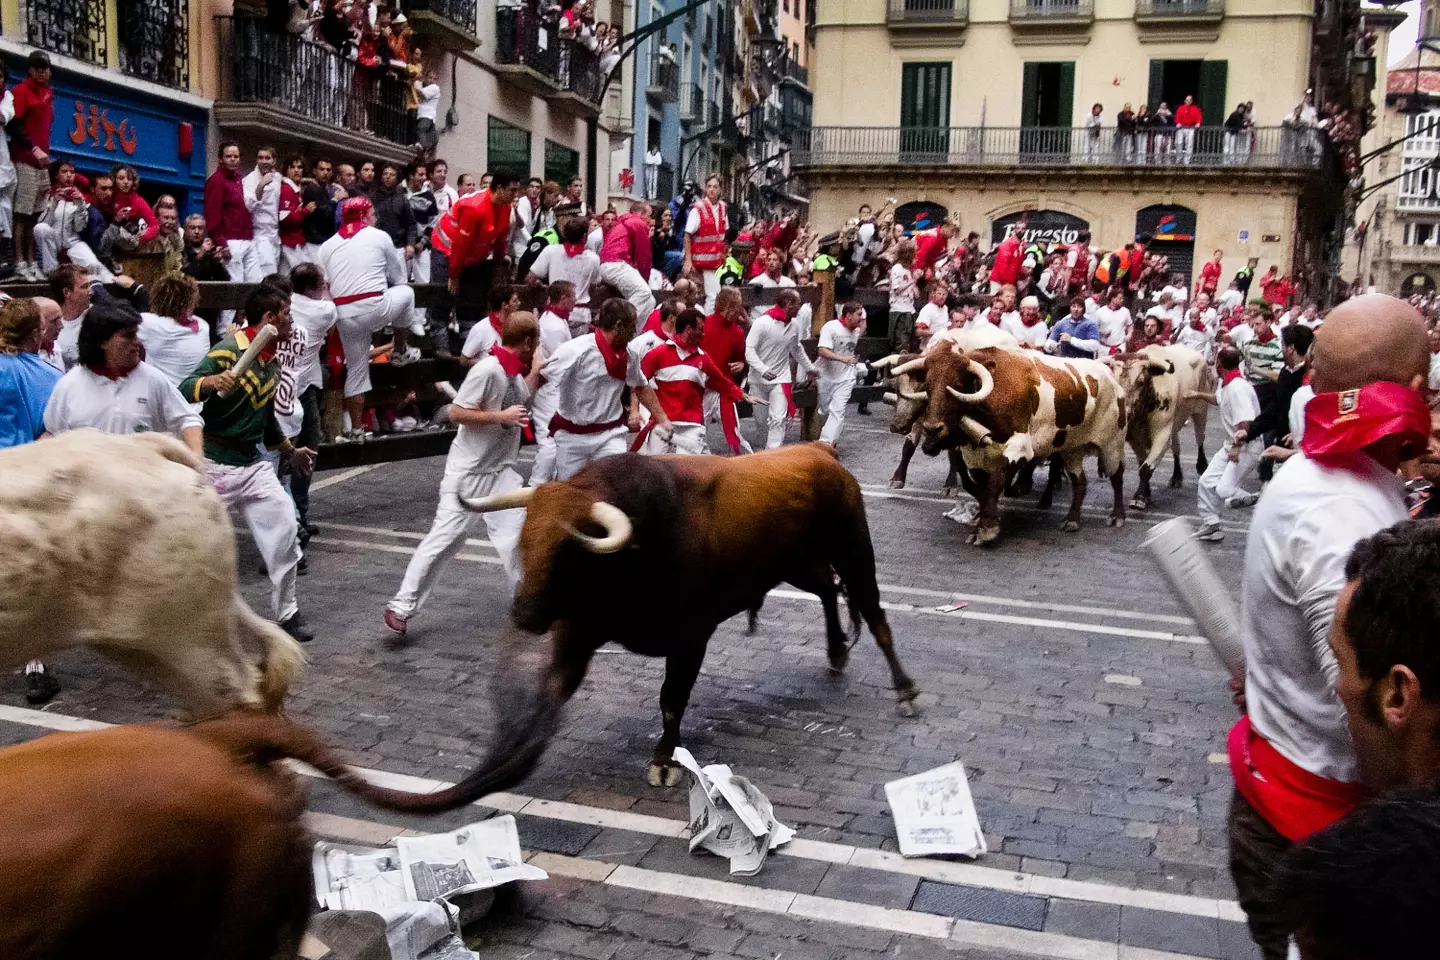 The most famous bull running festival in the world is held in Pamplona.